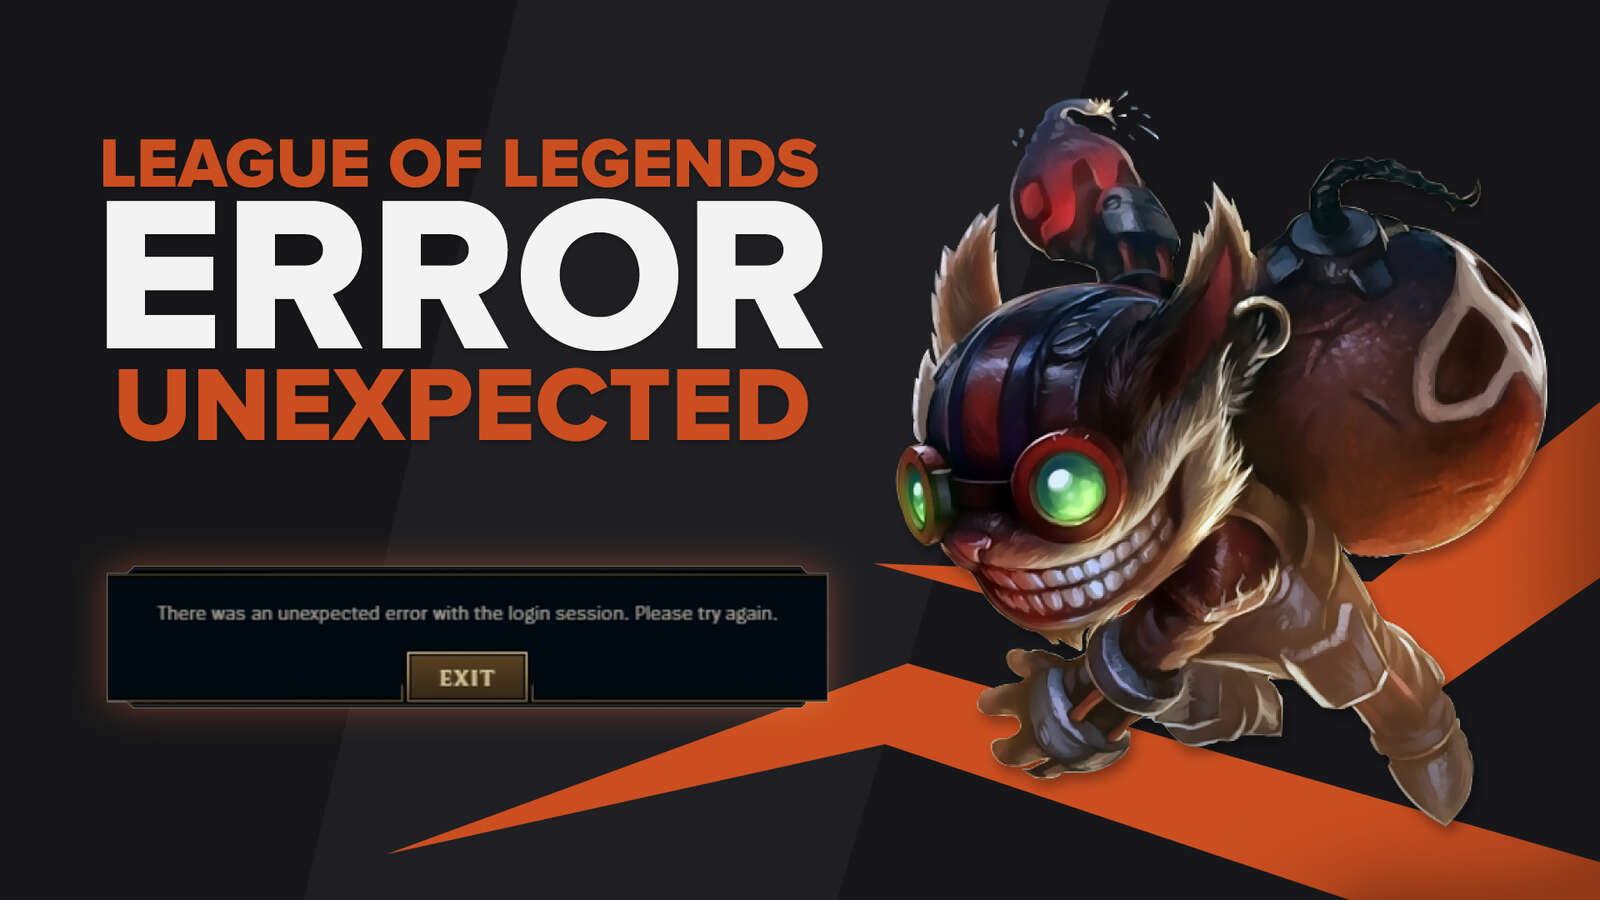 2 Ways to Fix the Unexpected Error With Login Session in LoL